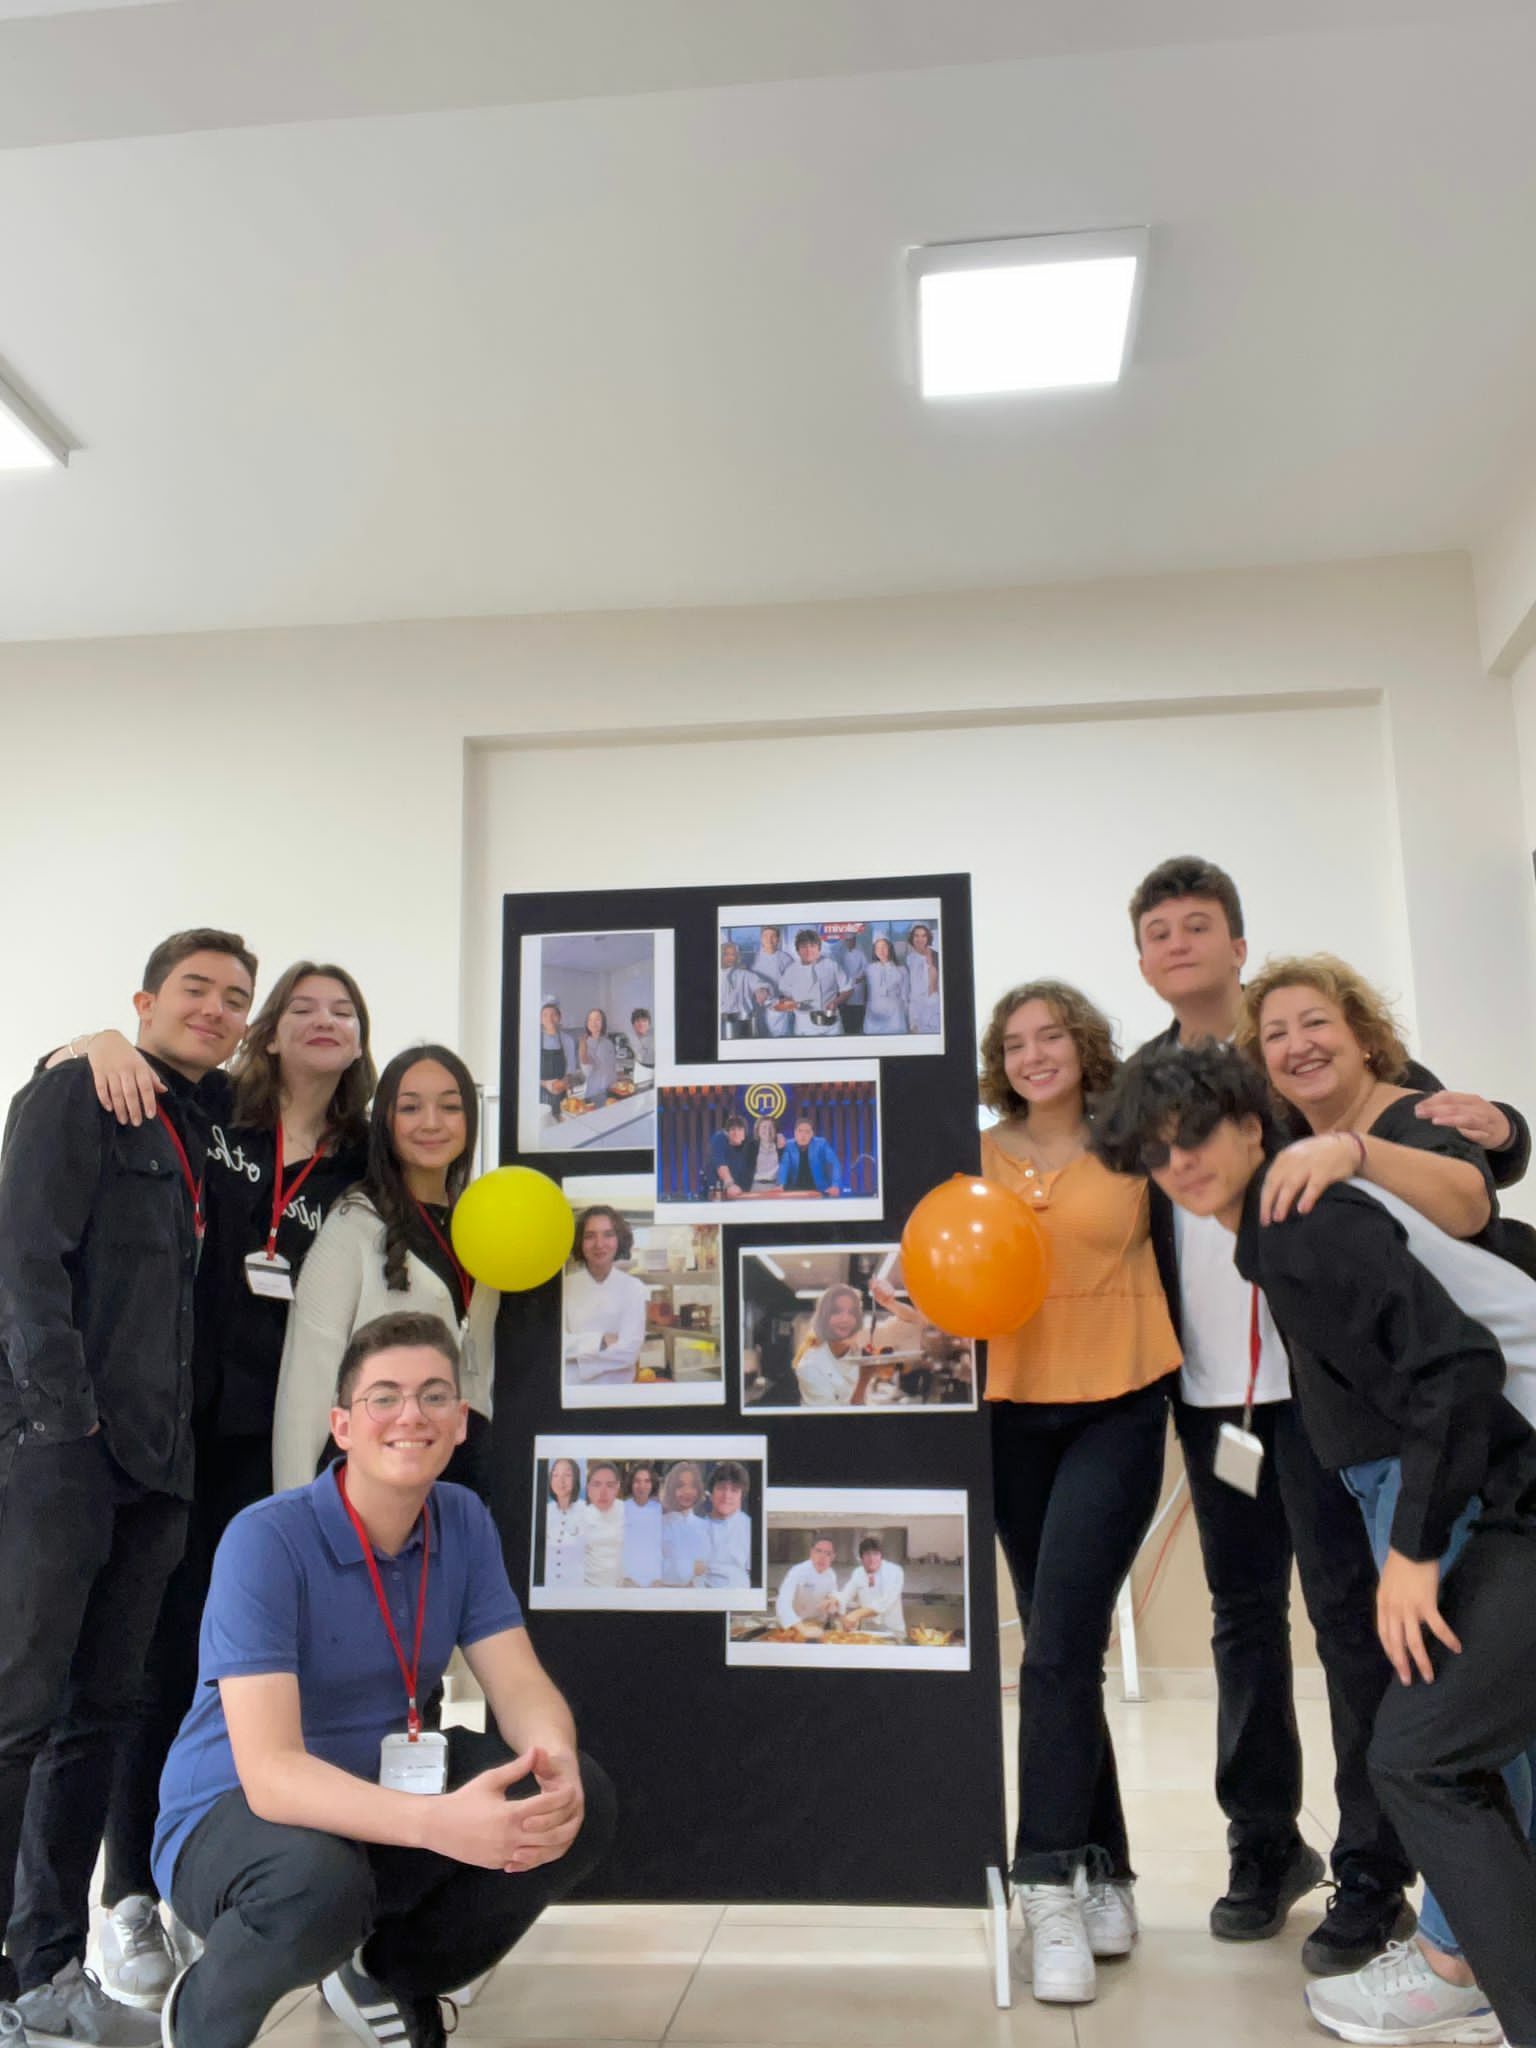 Martine and her classmates smiling in front of a poster board with photos